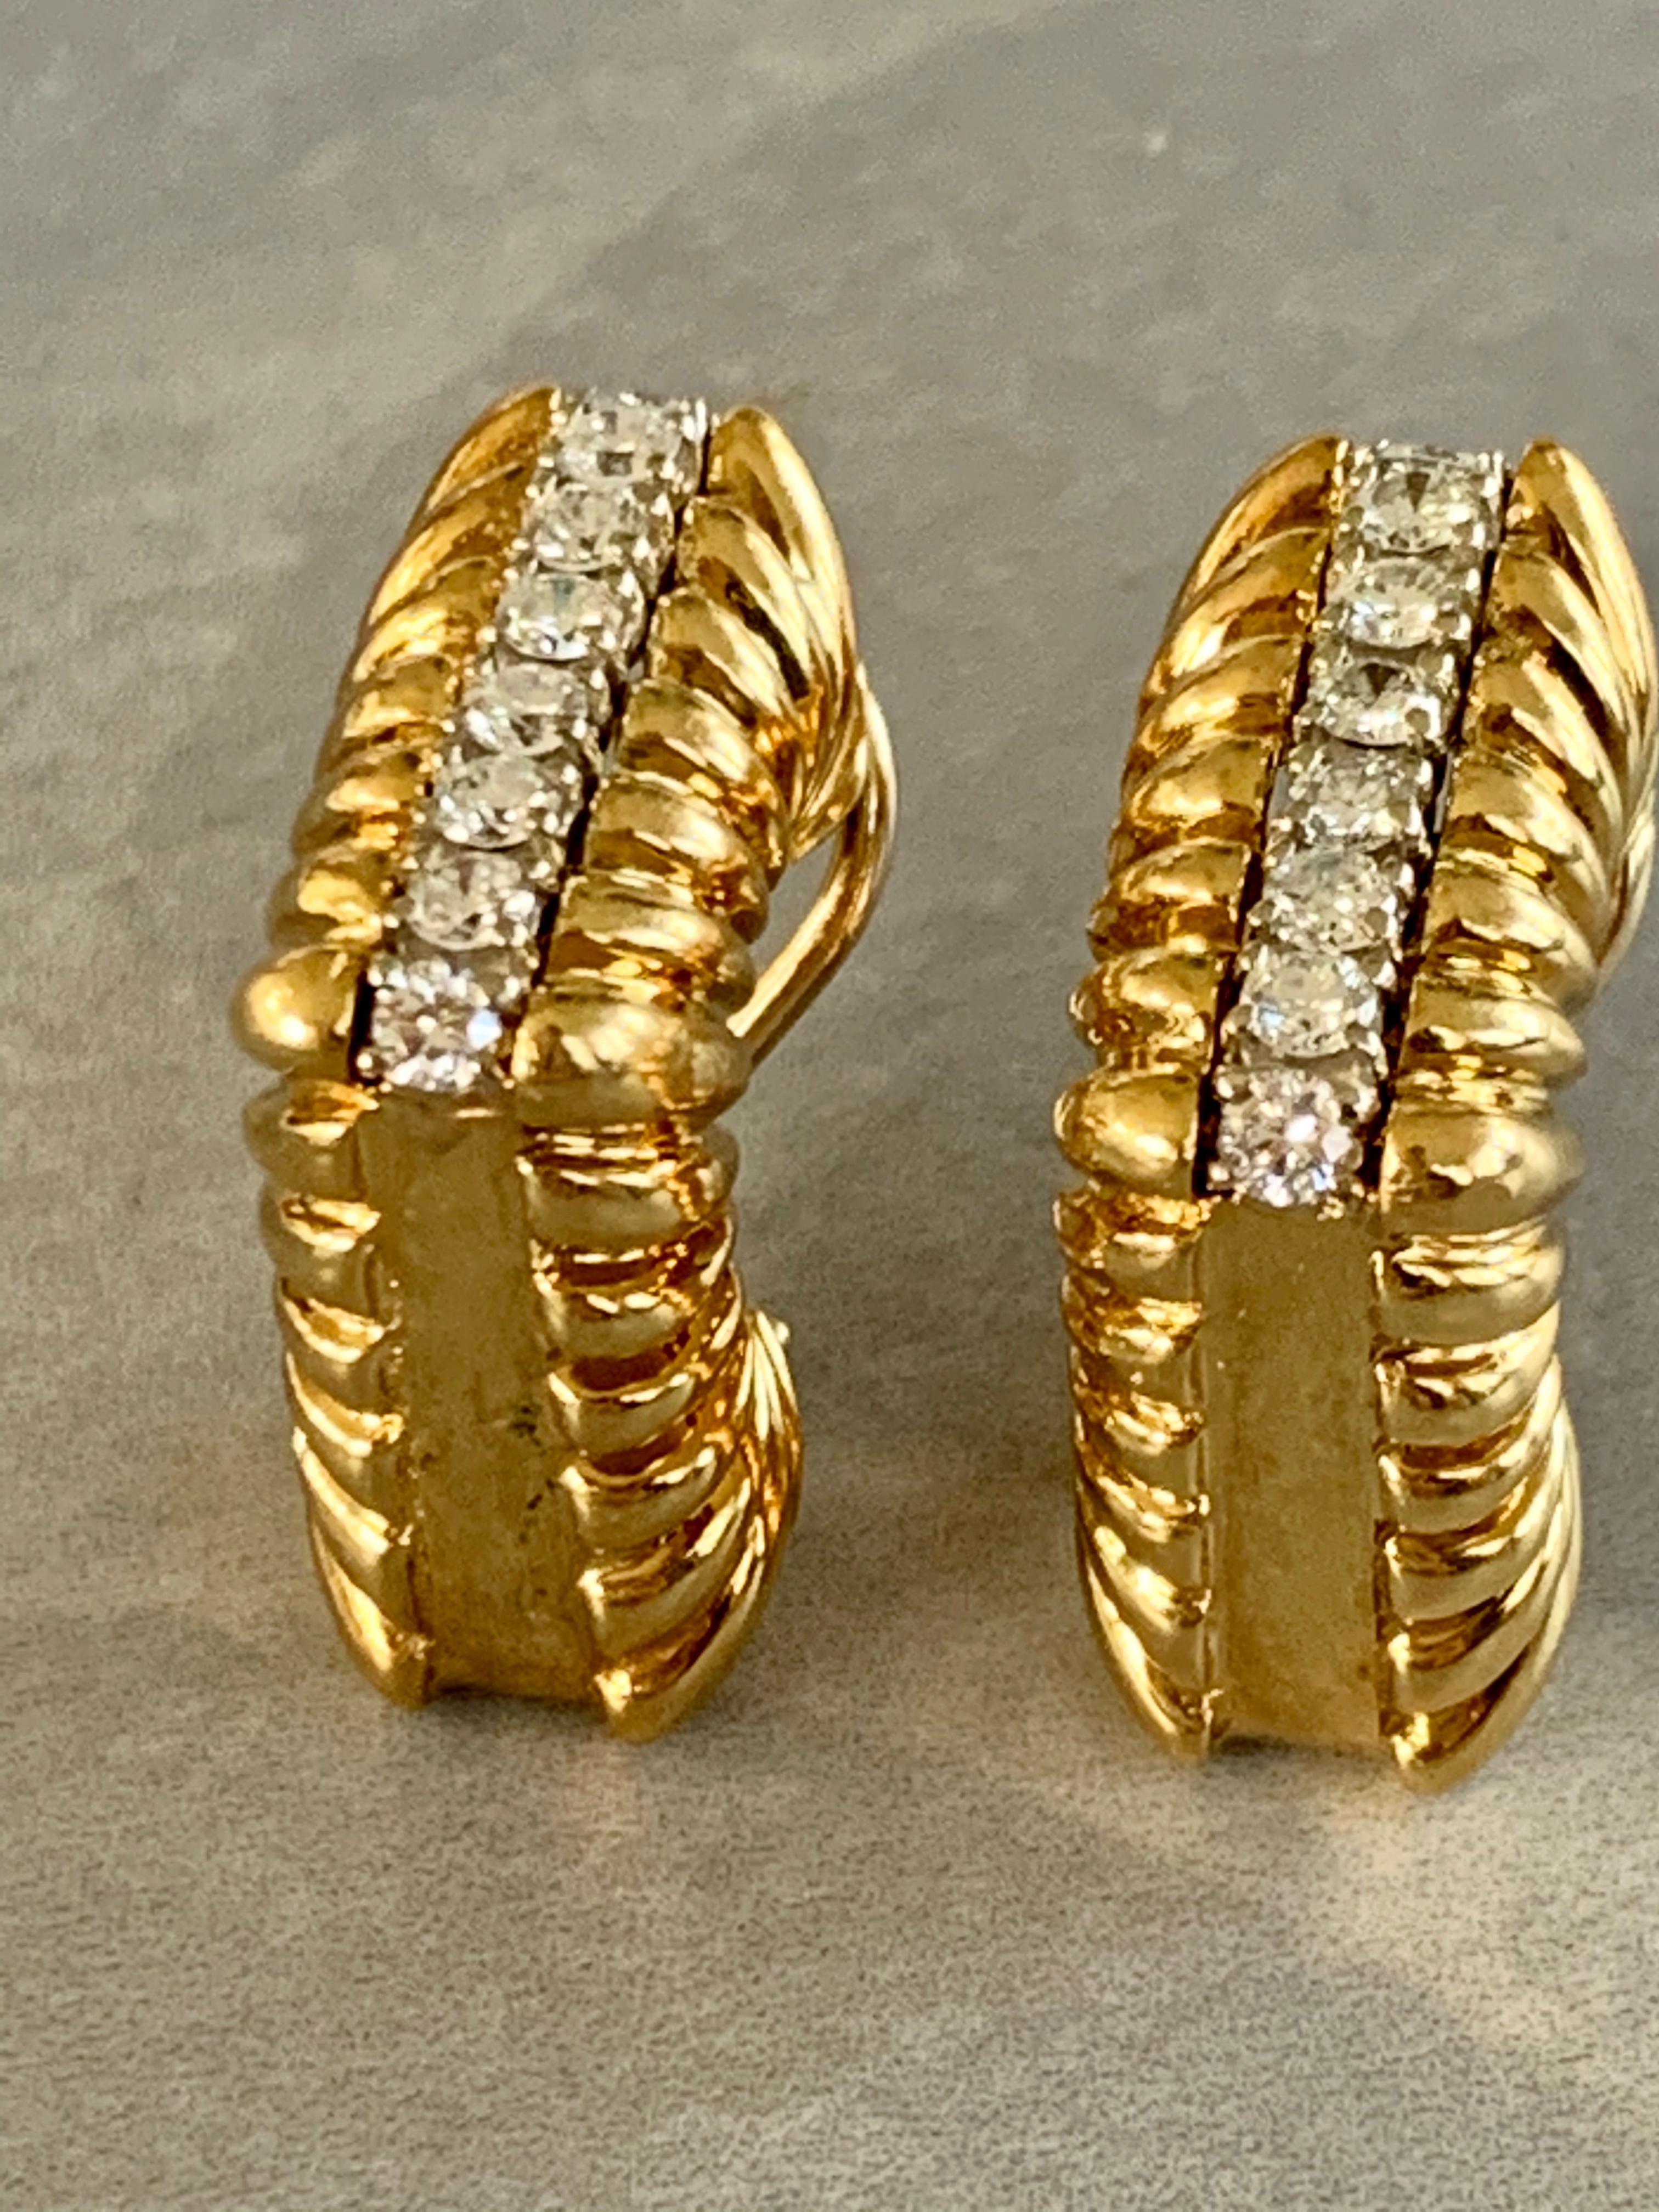 These fantastic earrings which are accented by a total of 20 round, brilliant cut Diamonds (10 per earring) totaling approximately 2ctw.  The closure is a lever back with post for pierced ears. 

Diamond grades: Vs(2)-SI(1)/G
Measurement: 1